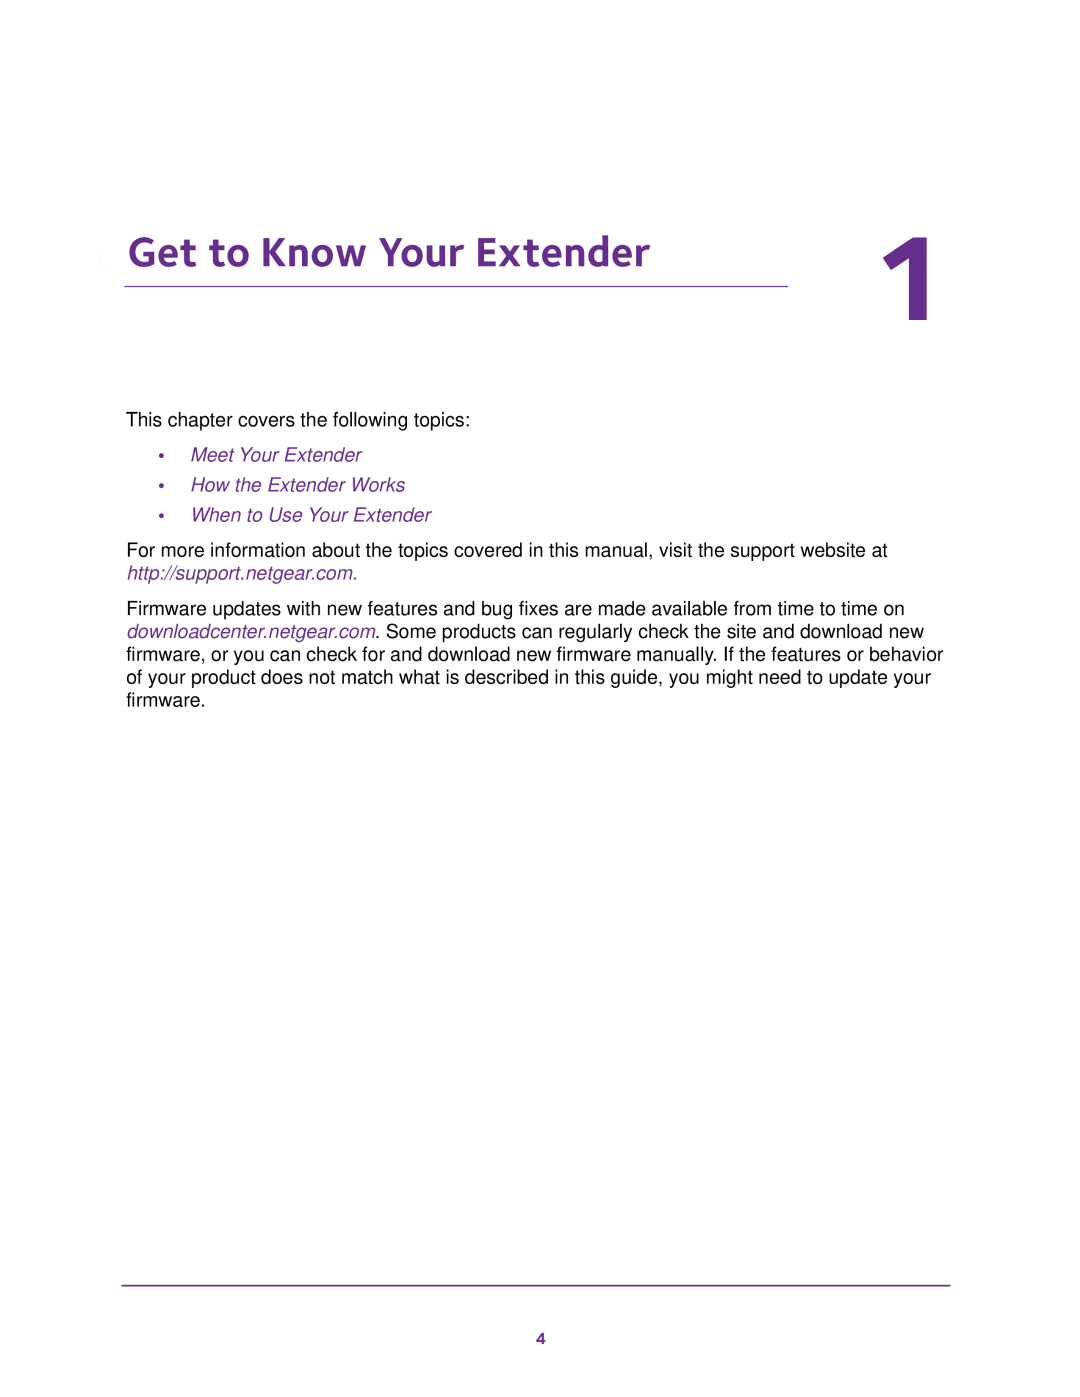 NETGEAR EX2700 user manual Get to Know Your Extender, Meet Your Extender How the Extender Works When to Use Your Extender 